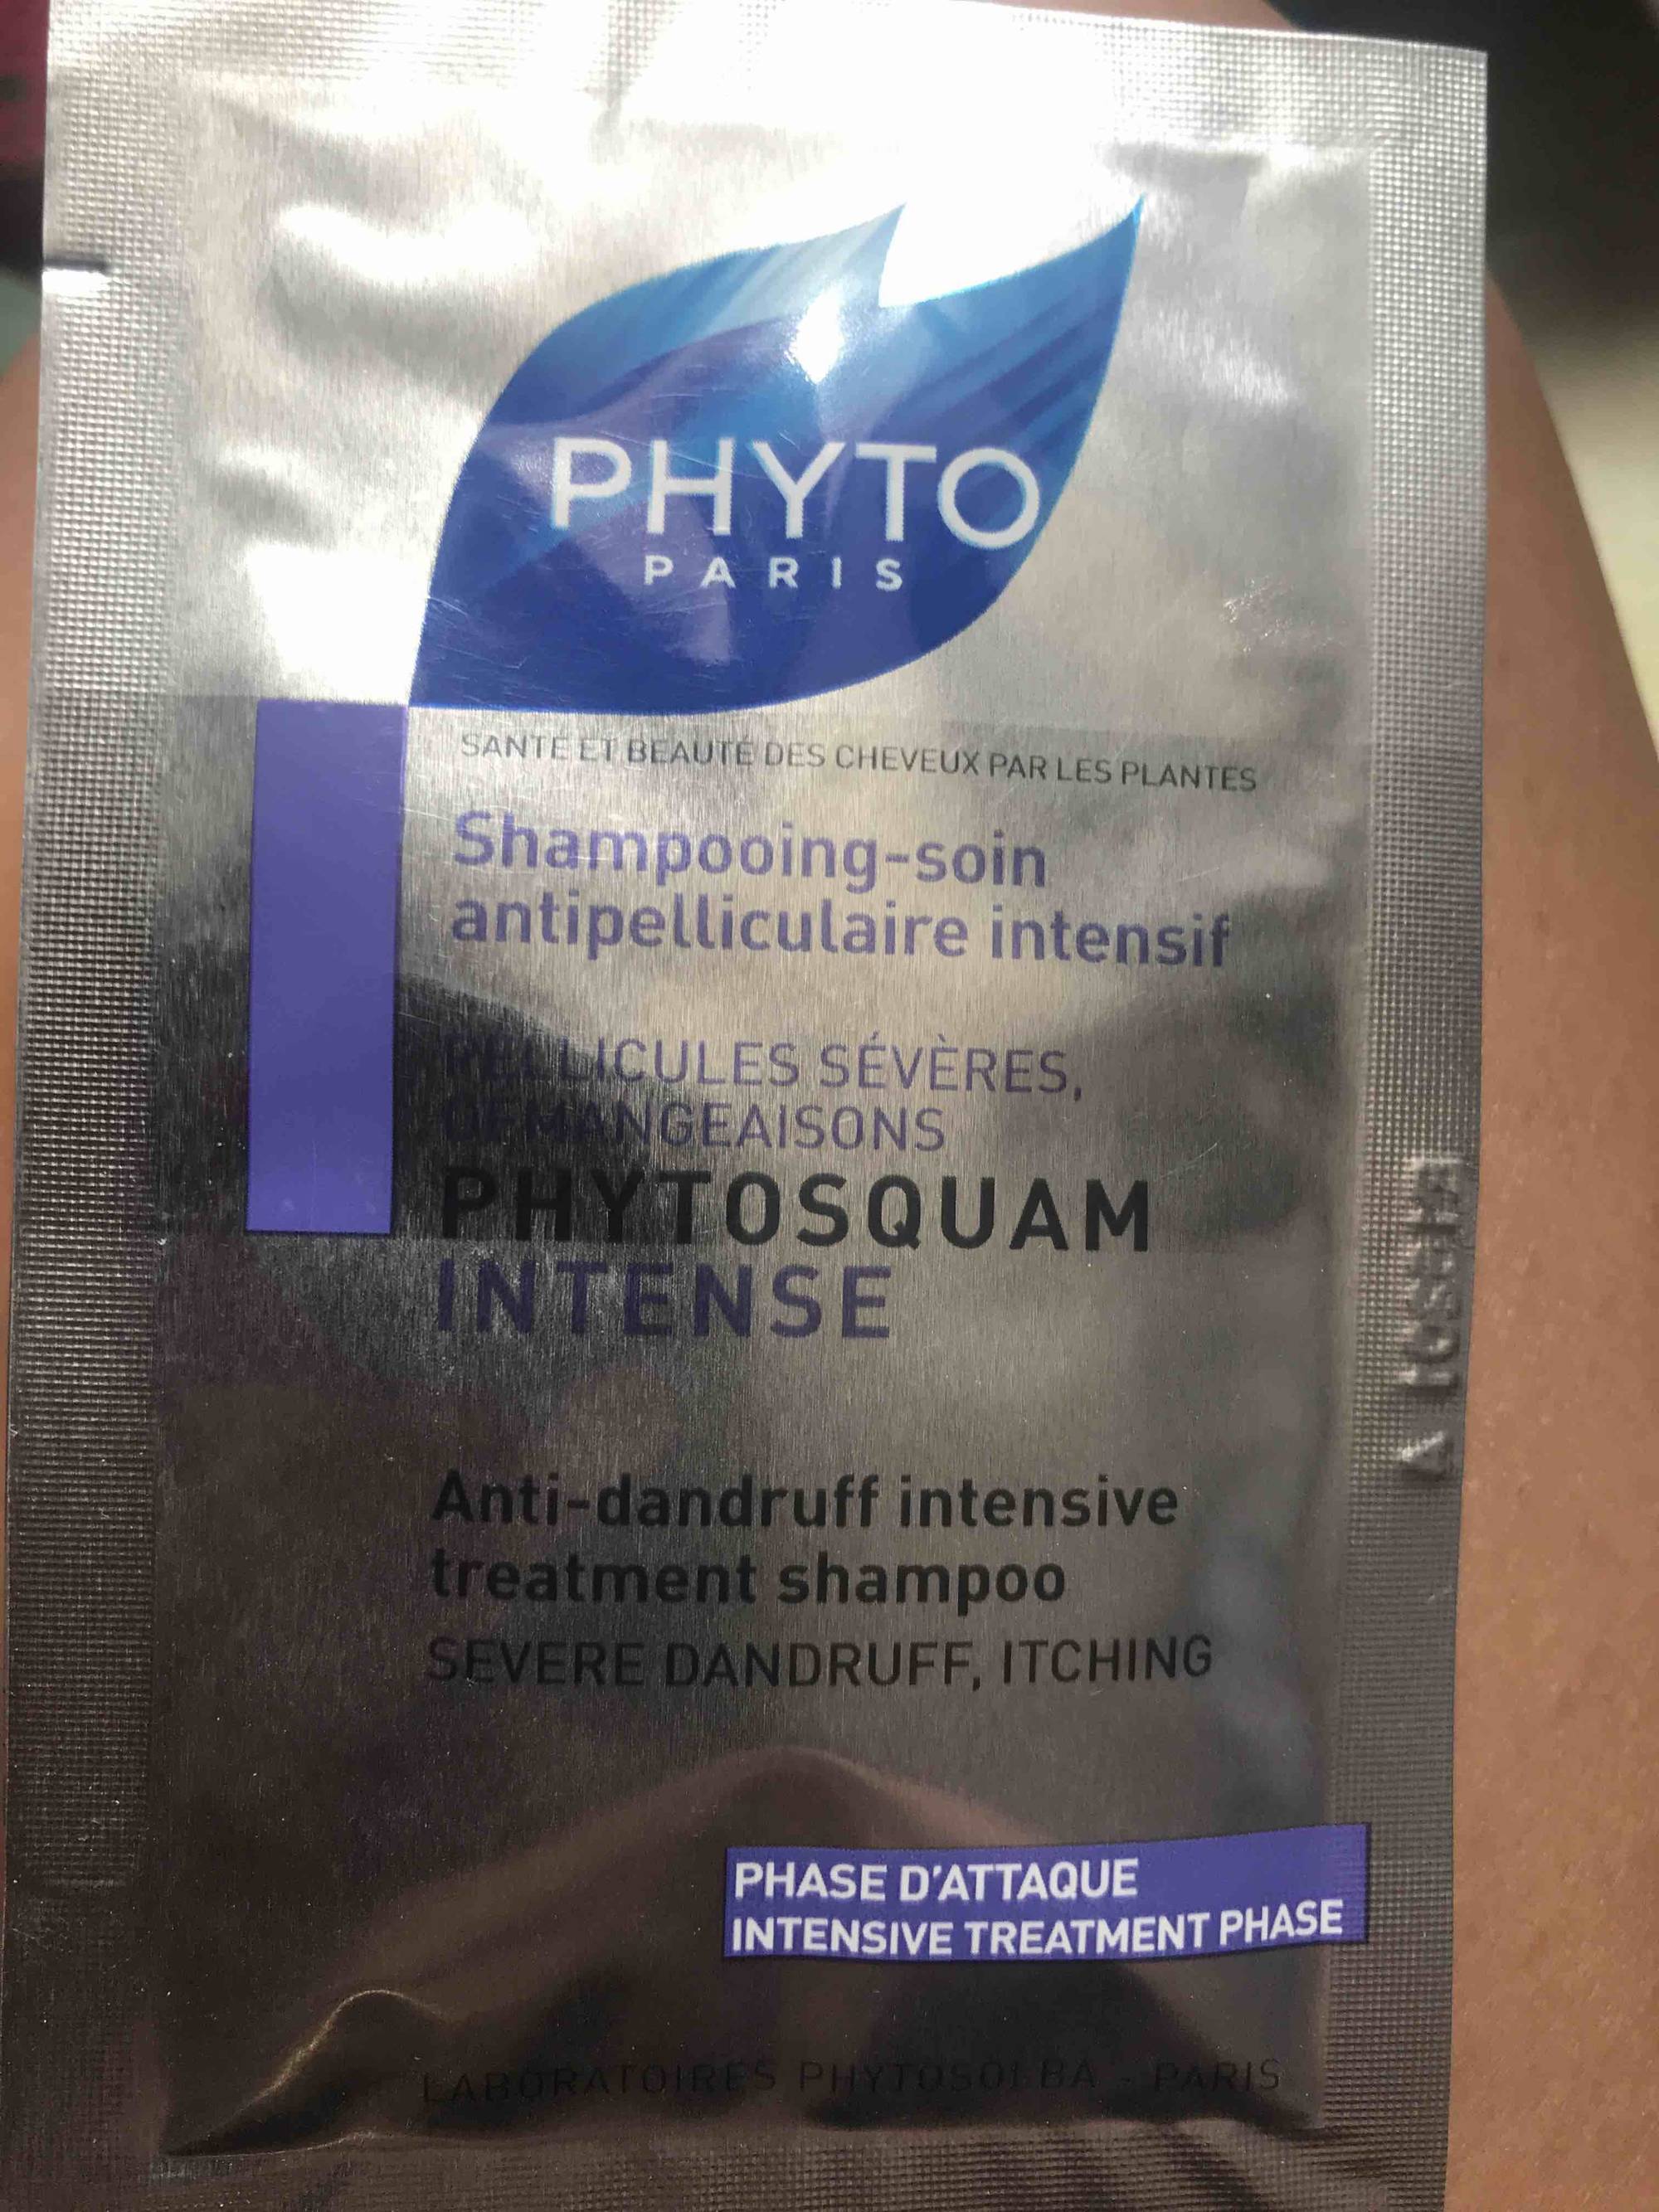 PHYTO - Phytosquam intense - Shampooing-soin antipelliculaire intensif